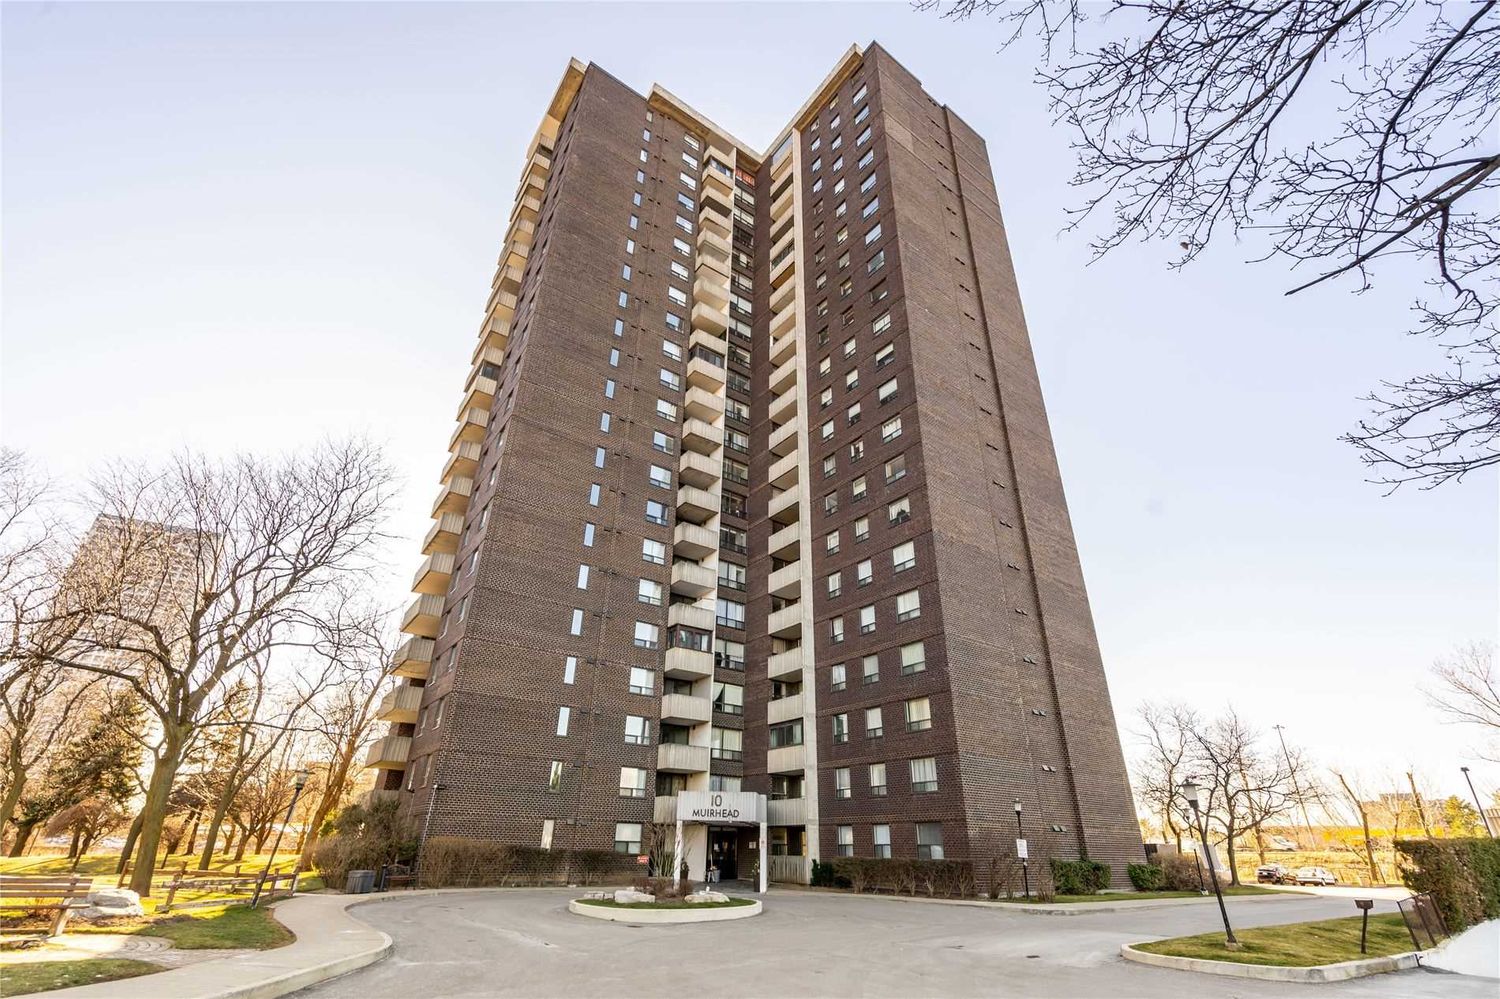 10 Muirhead Road. Crossroads Condos is located in  North York, Toronto - image #3 of 3